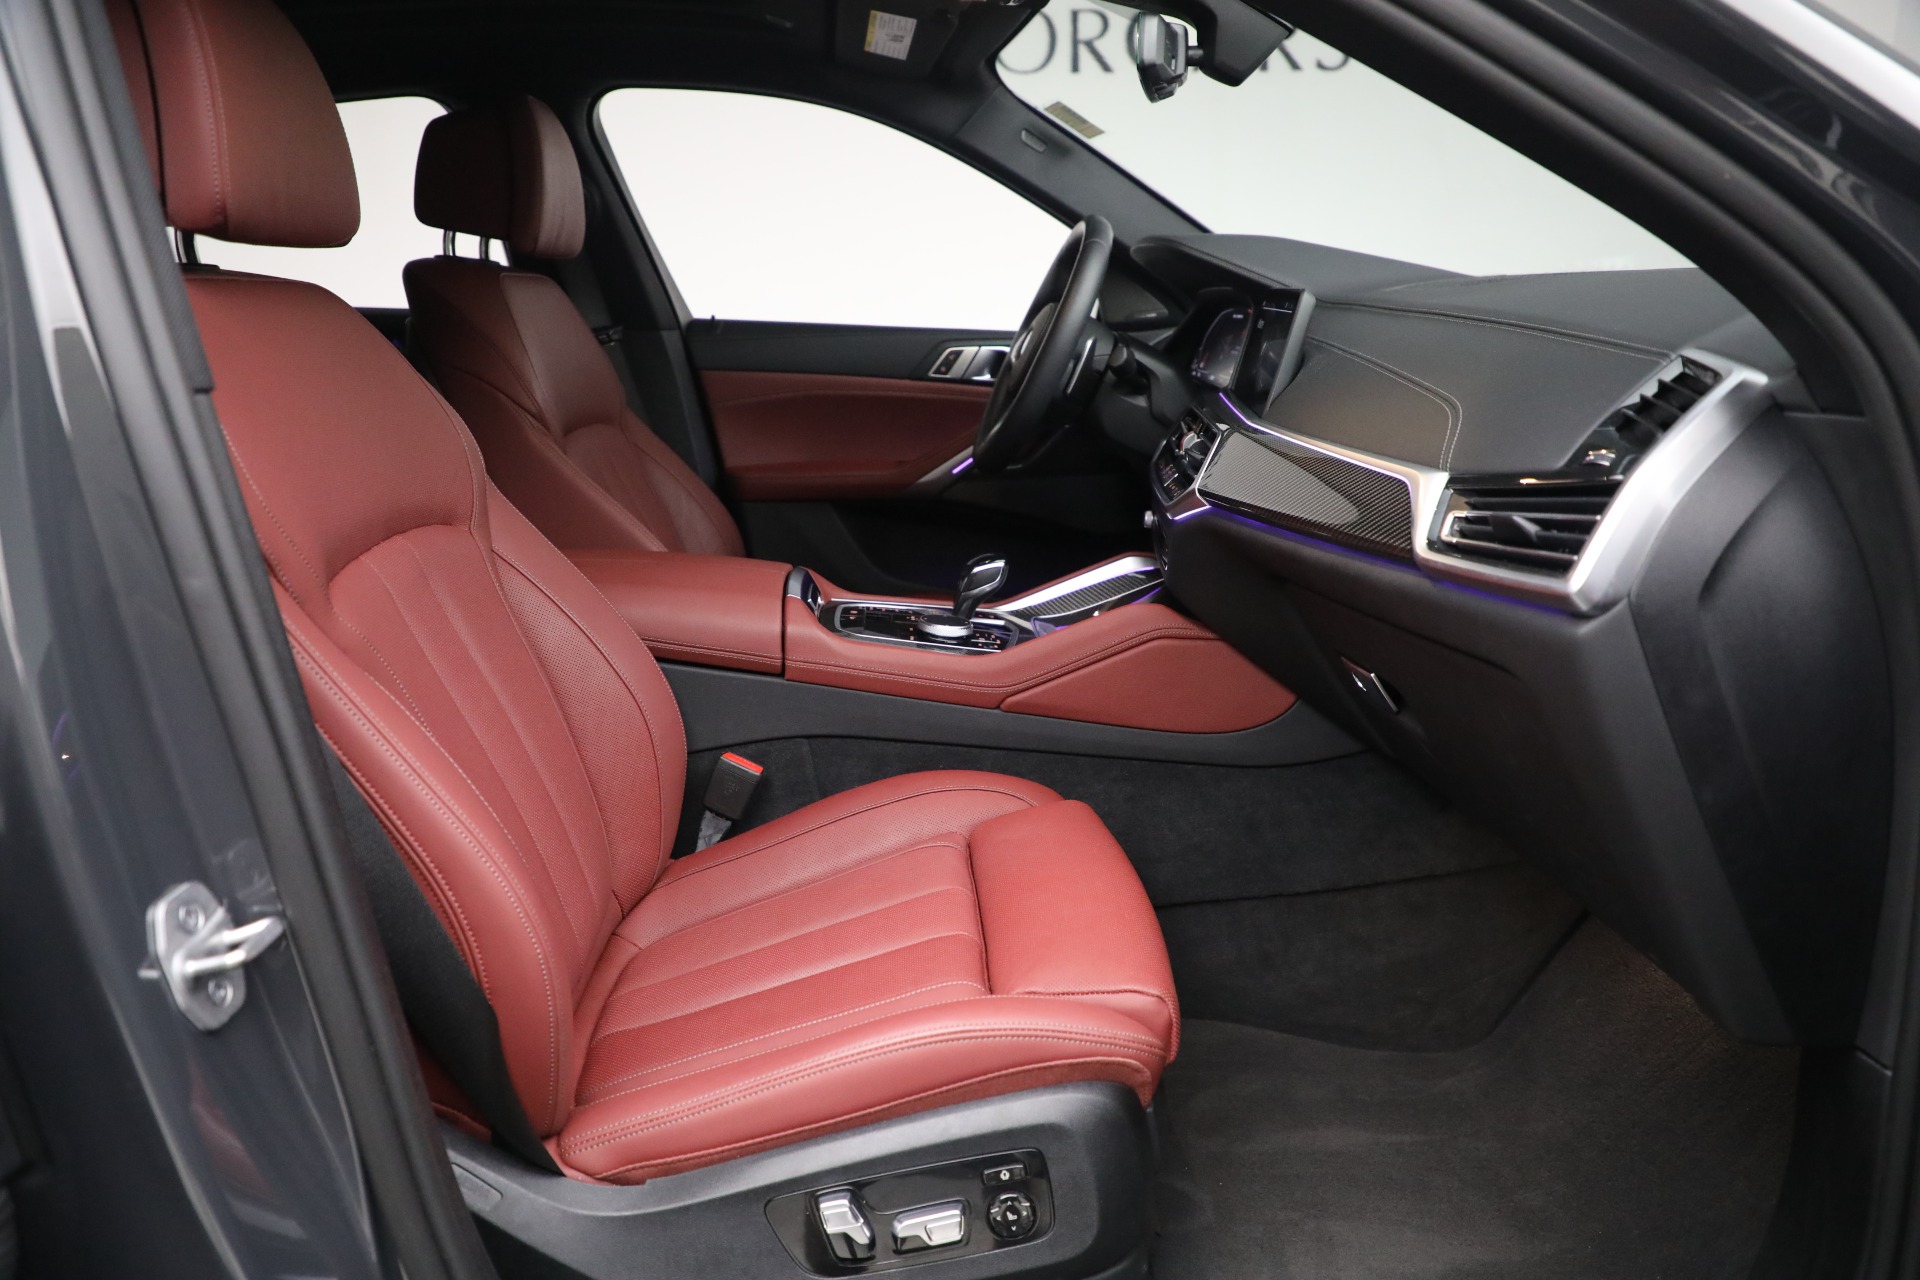 BMW of Stratham - Check out that Tacora Red interior! #BMW